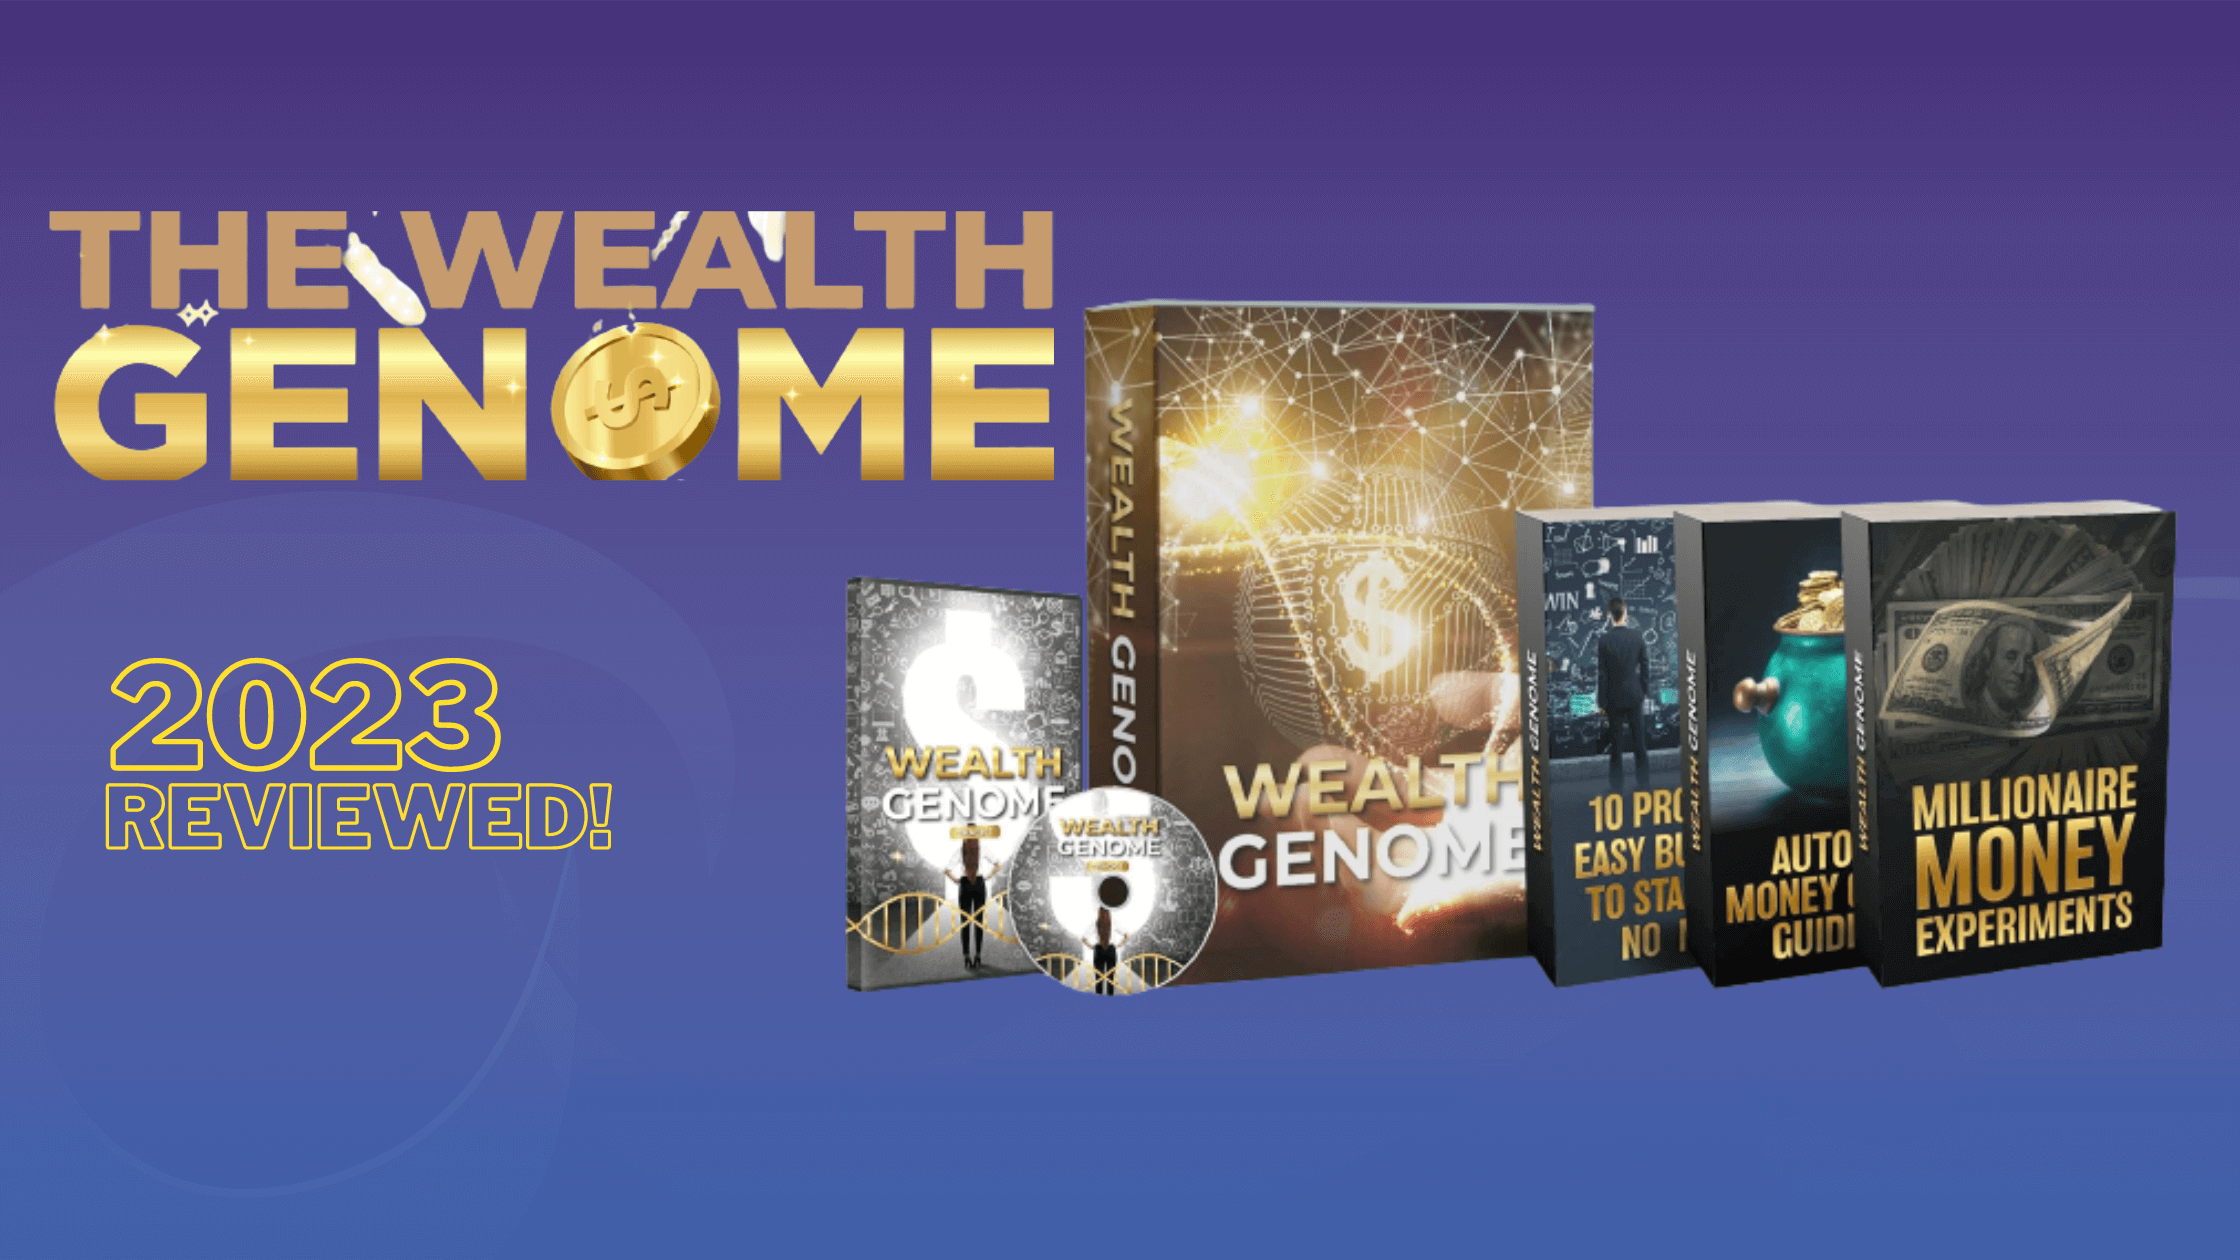 The Wealth Genome Review